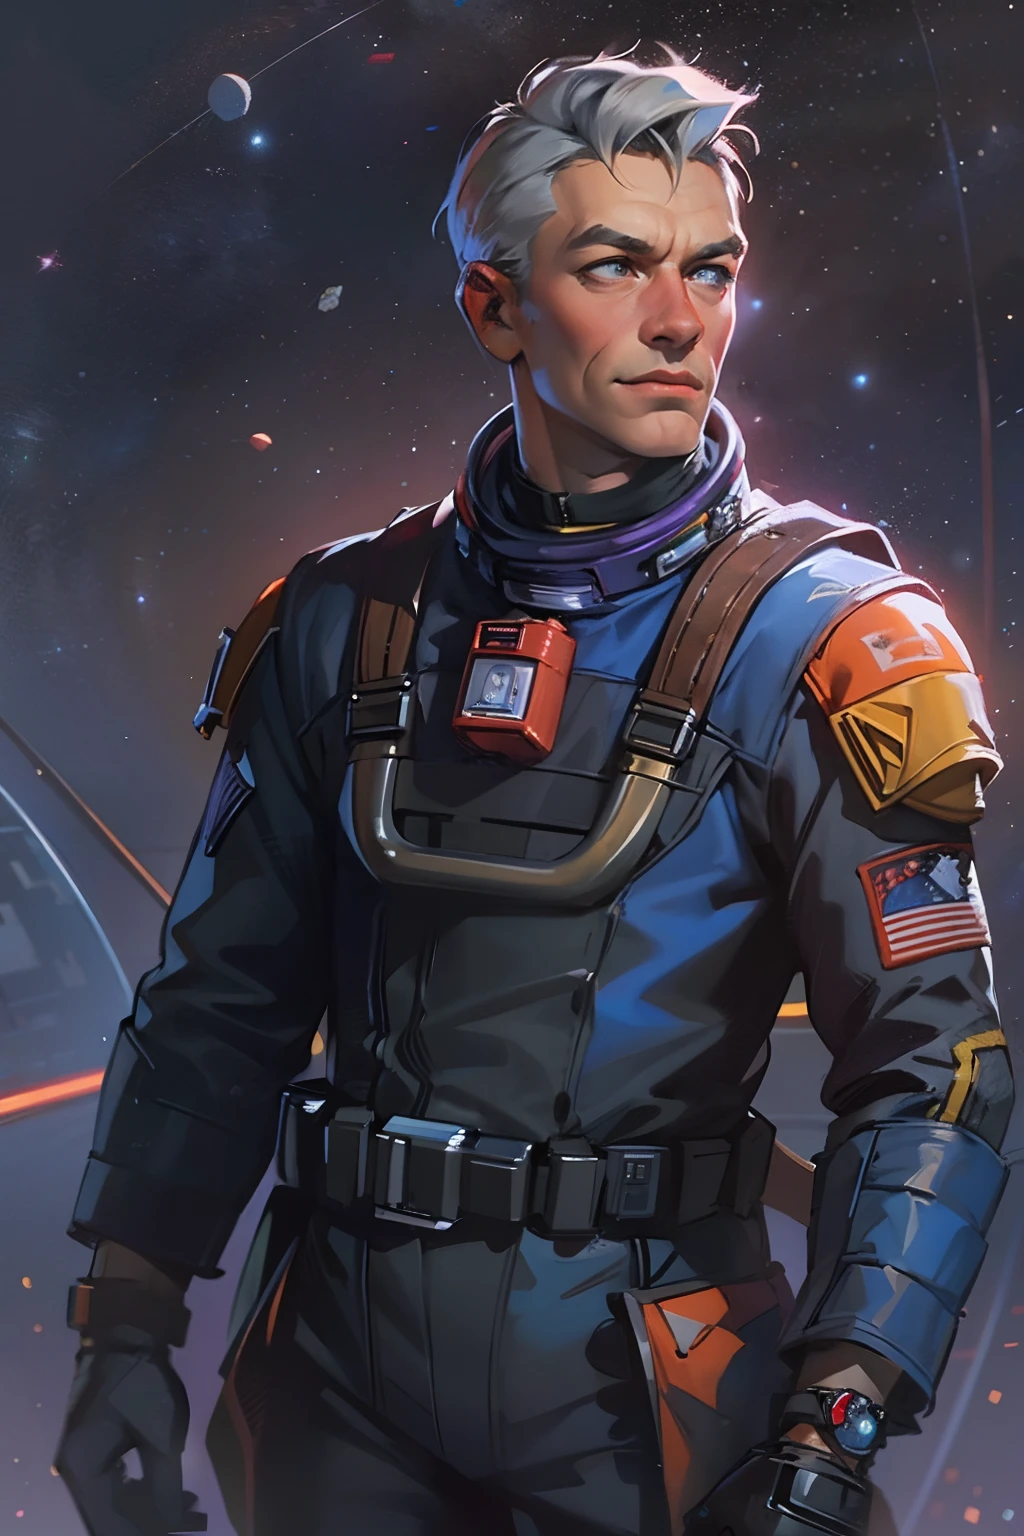 A man with short-cropped gray hair and piercing blue eyes. He is 45 years old. Wears a black space station officer uniform, a space pistol on his waist and a purple bracelet, full body, space western, star wars, star trek, Guardians of the Galaxy, Treasure Planet, space peter pan, young man, tanned skin, ginger, smug, soft smile, adventurous, space pilot, fashion space suit, retrofuturism, atompunk, space opera, character design